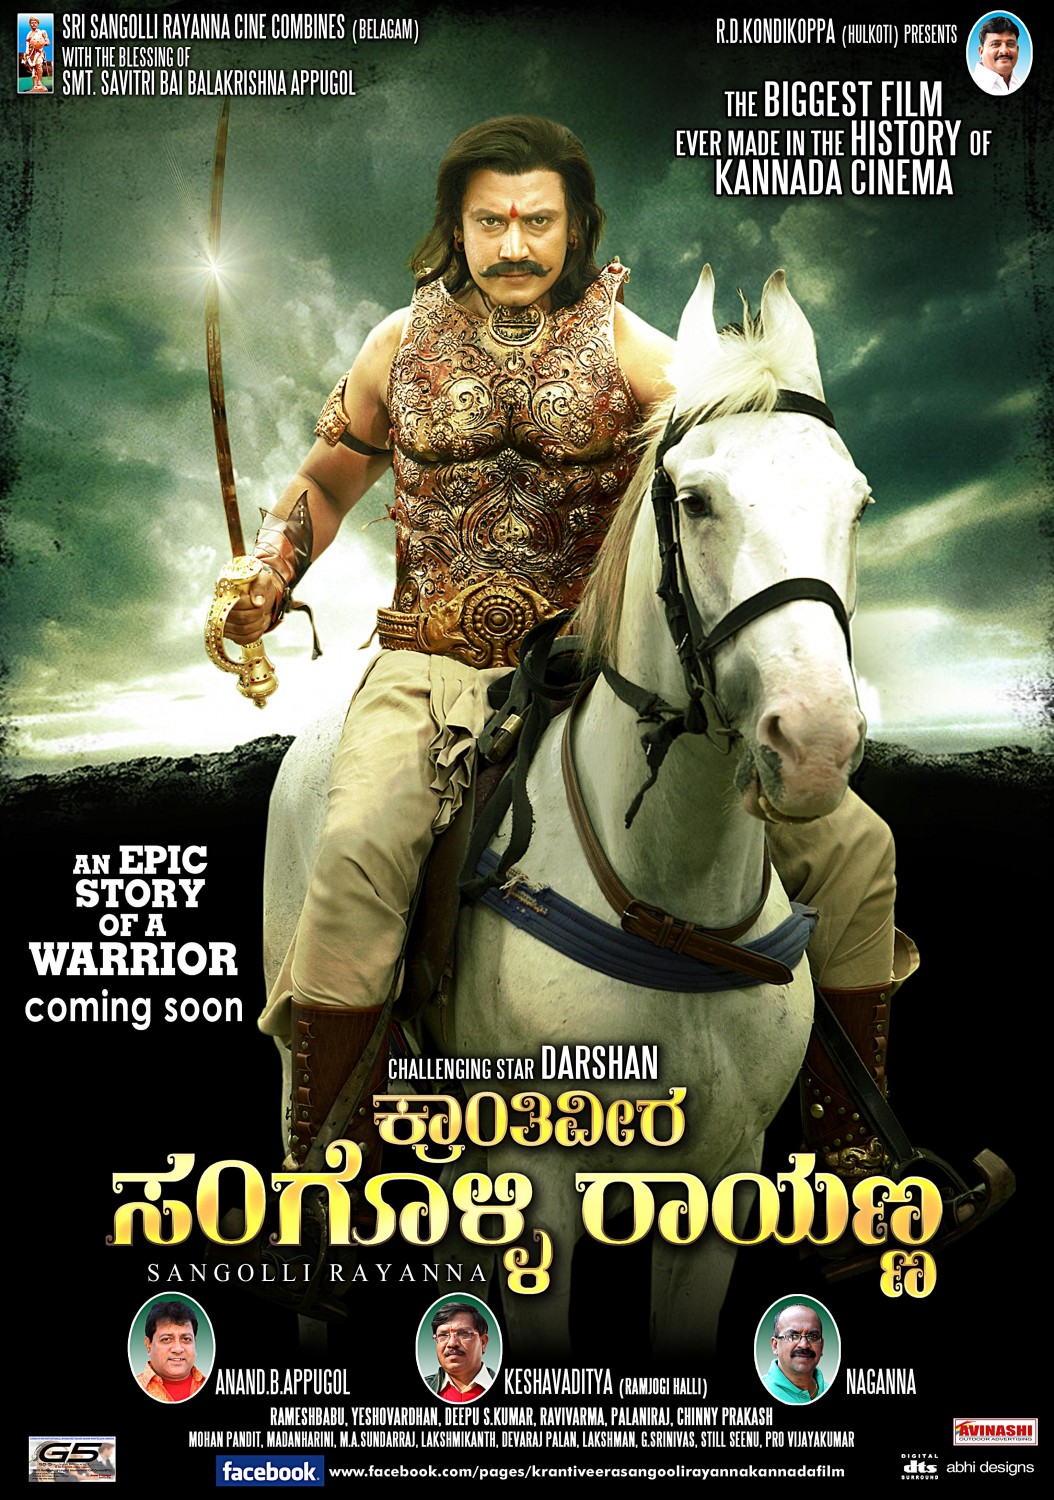 Extra Large Movie Poster Image for Sangolli Rayanna (#29 of 79)